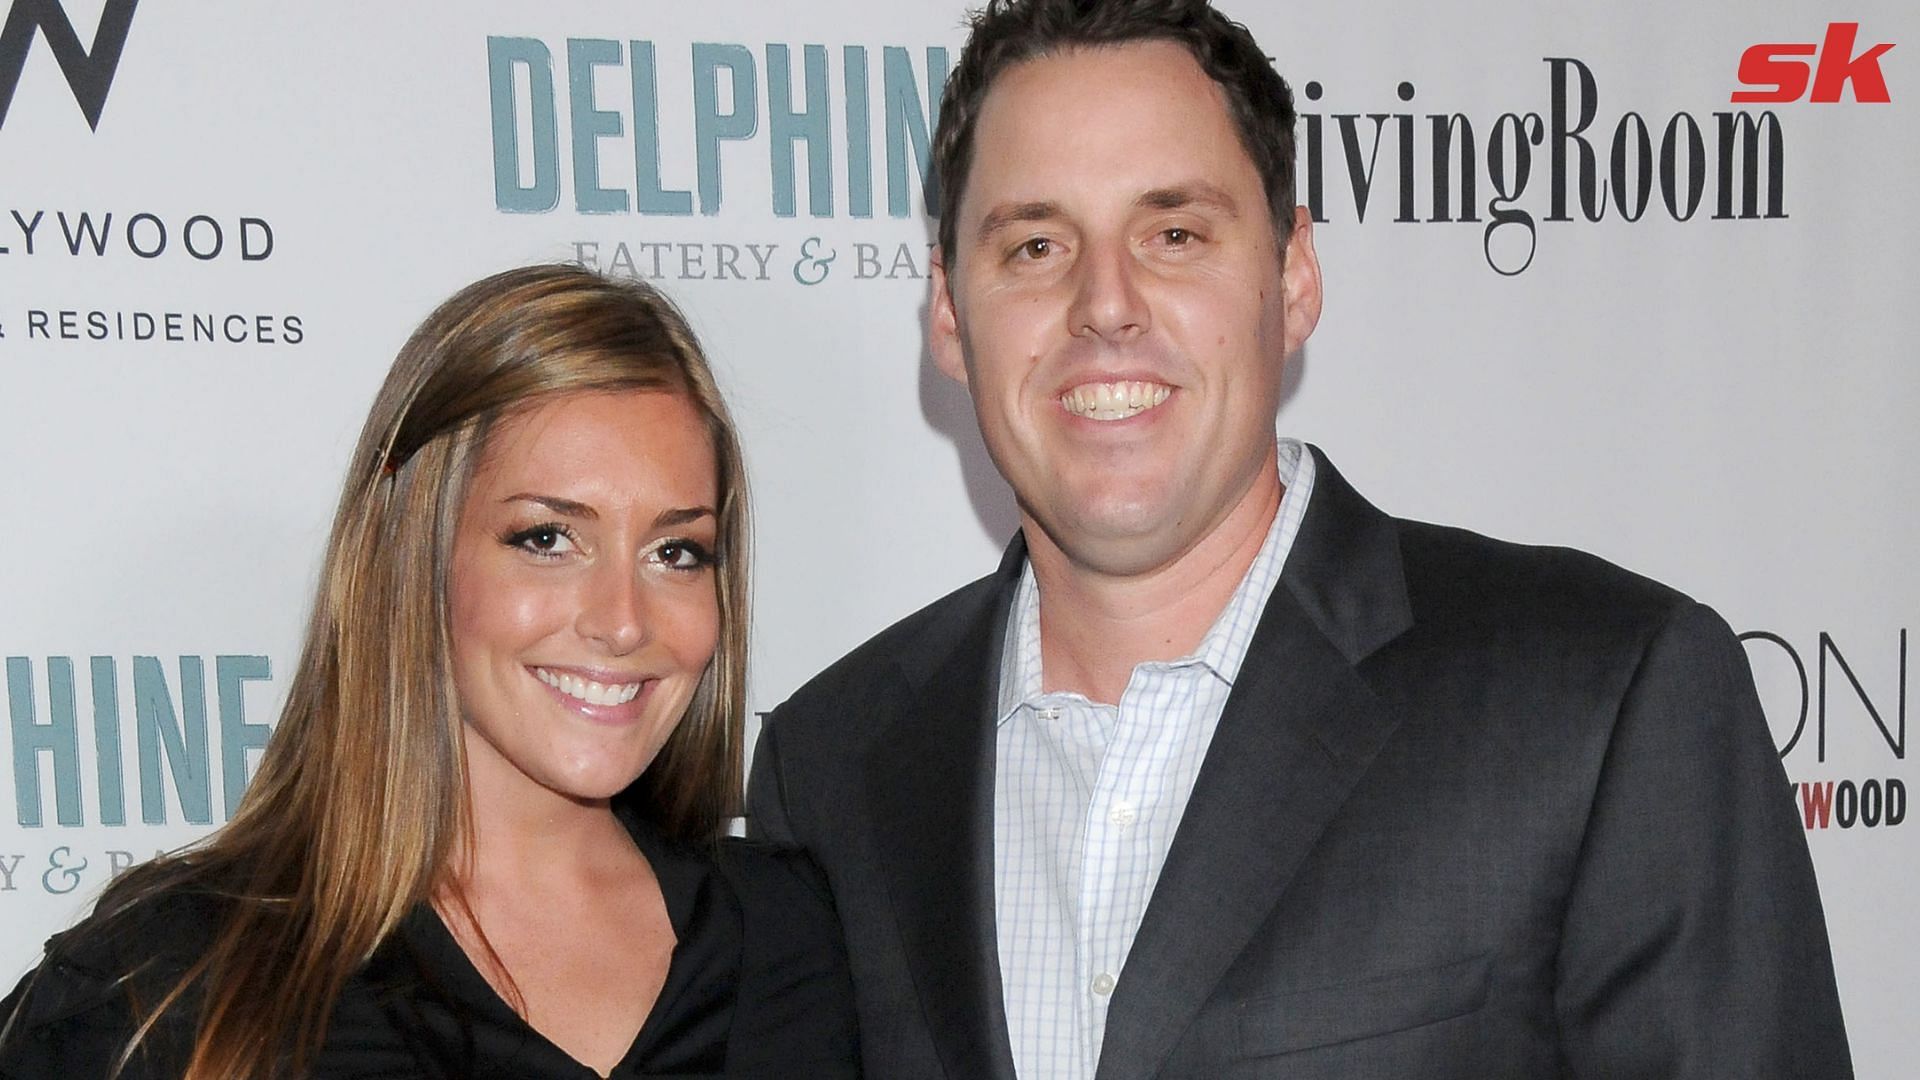 When former Red Sox pitcher John Lackey filed for divorce amid wife